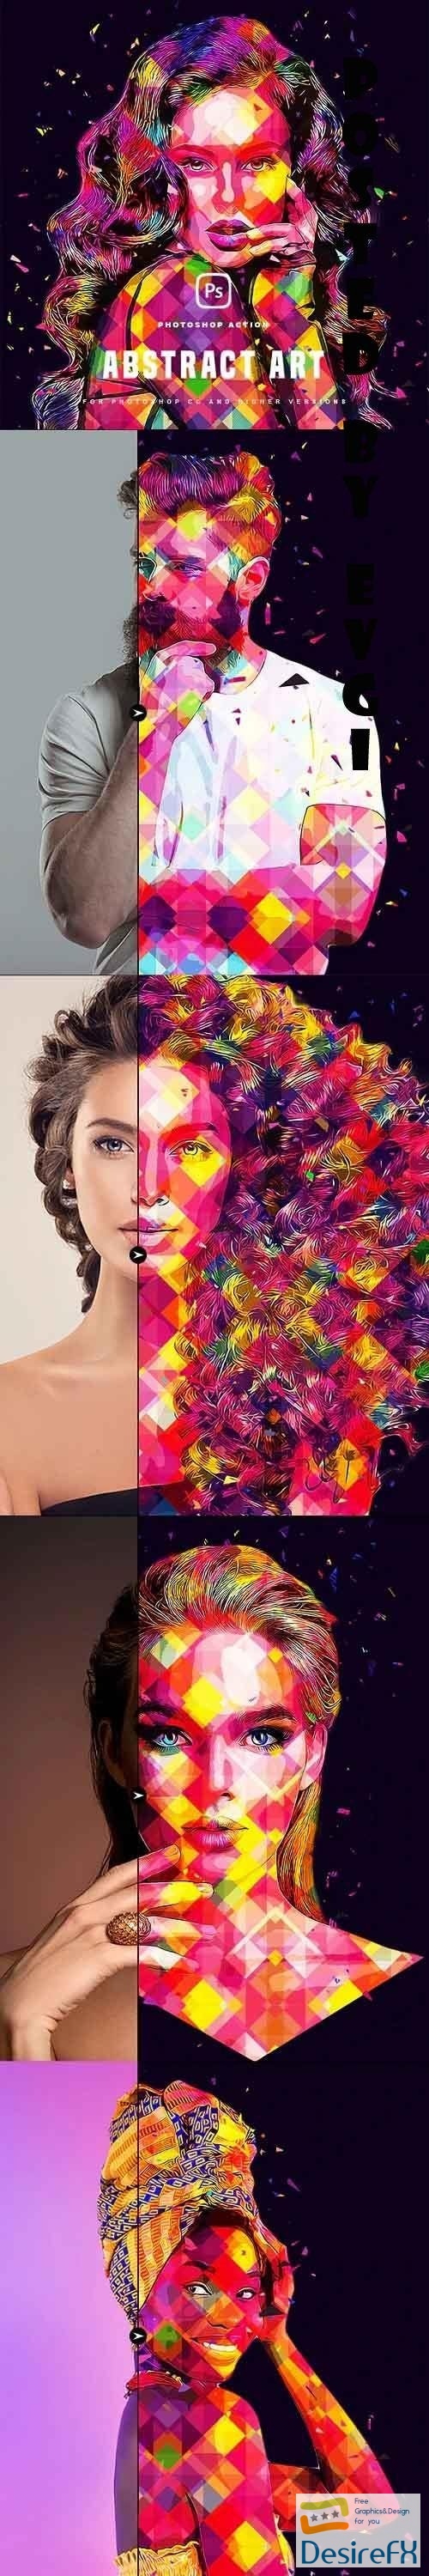 Abstract Art Photoshop Action - 36400251